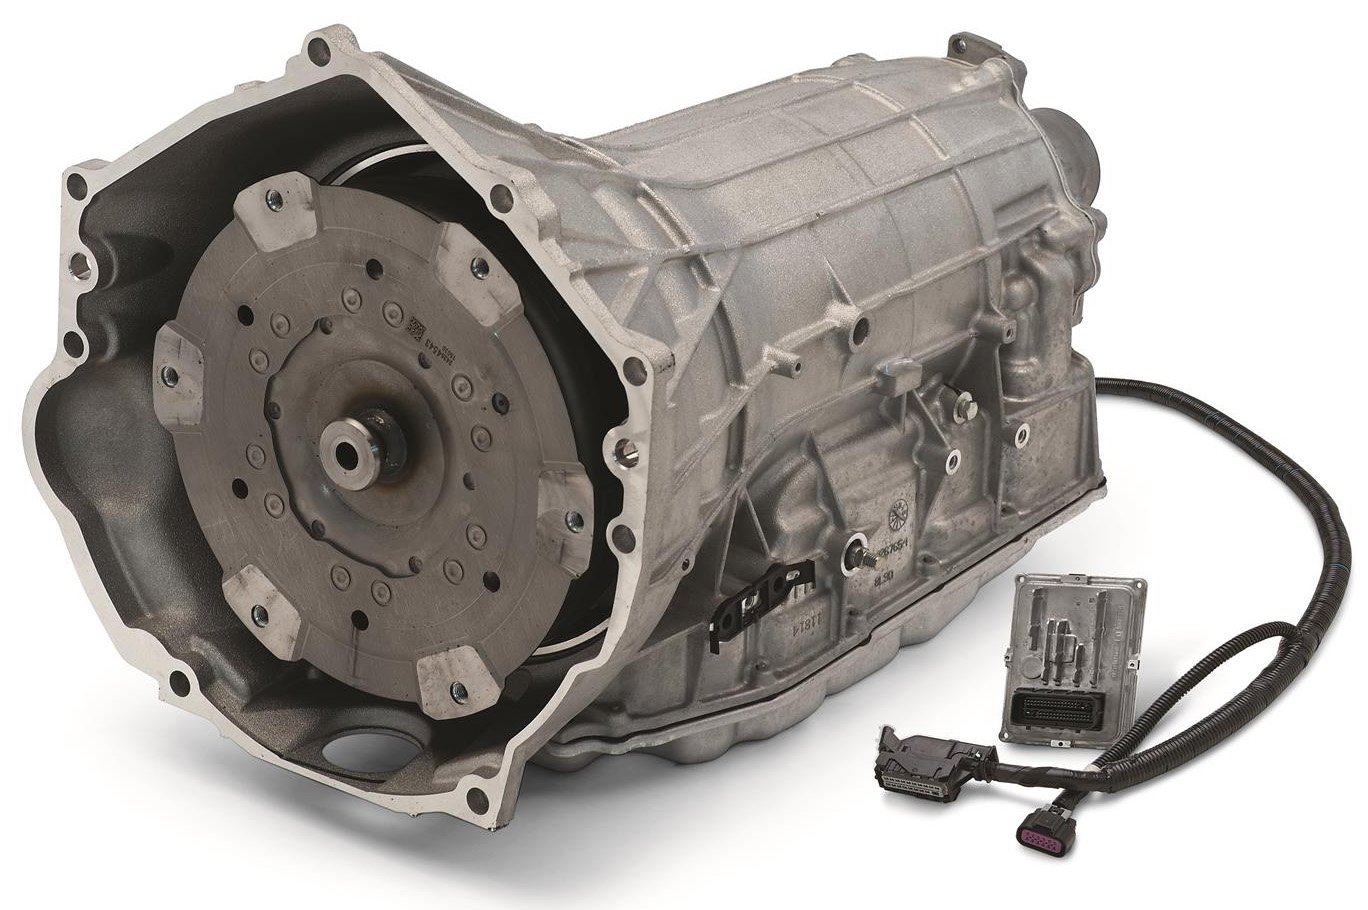 SuperMatic 8L90-E Eight-Speed Automatic Transmission for GM LT1 Crate Engines